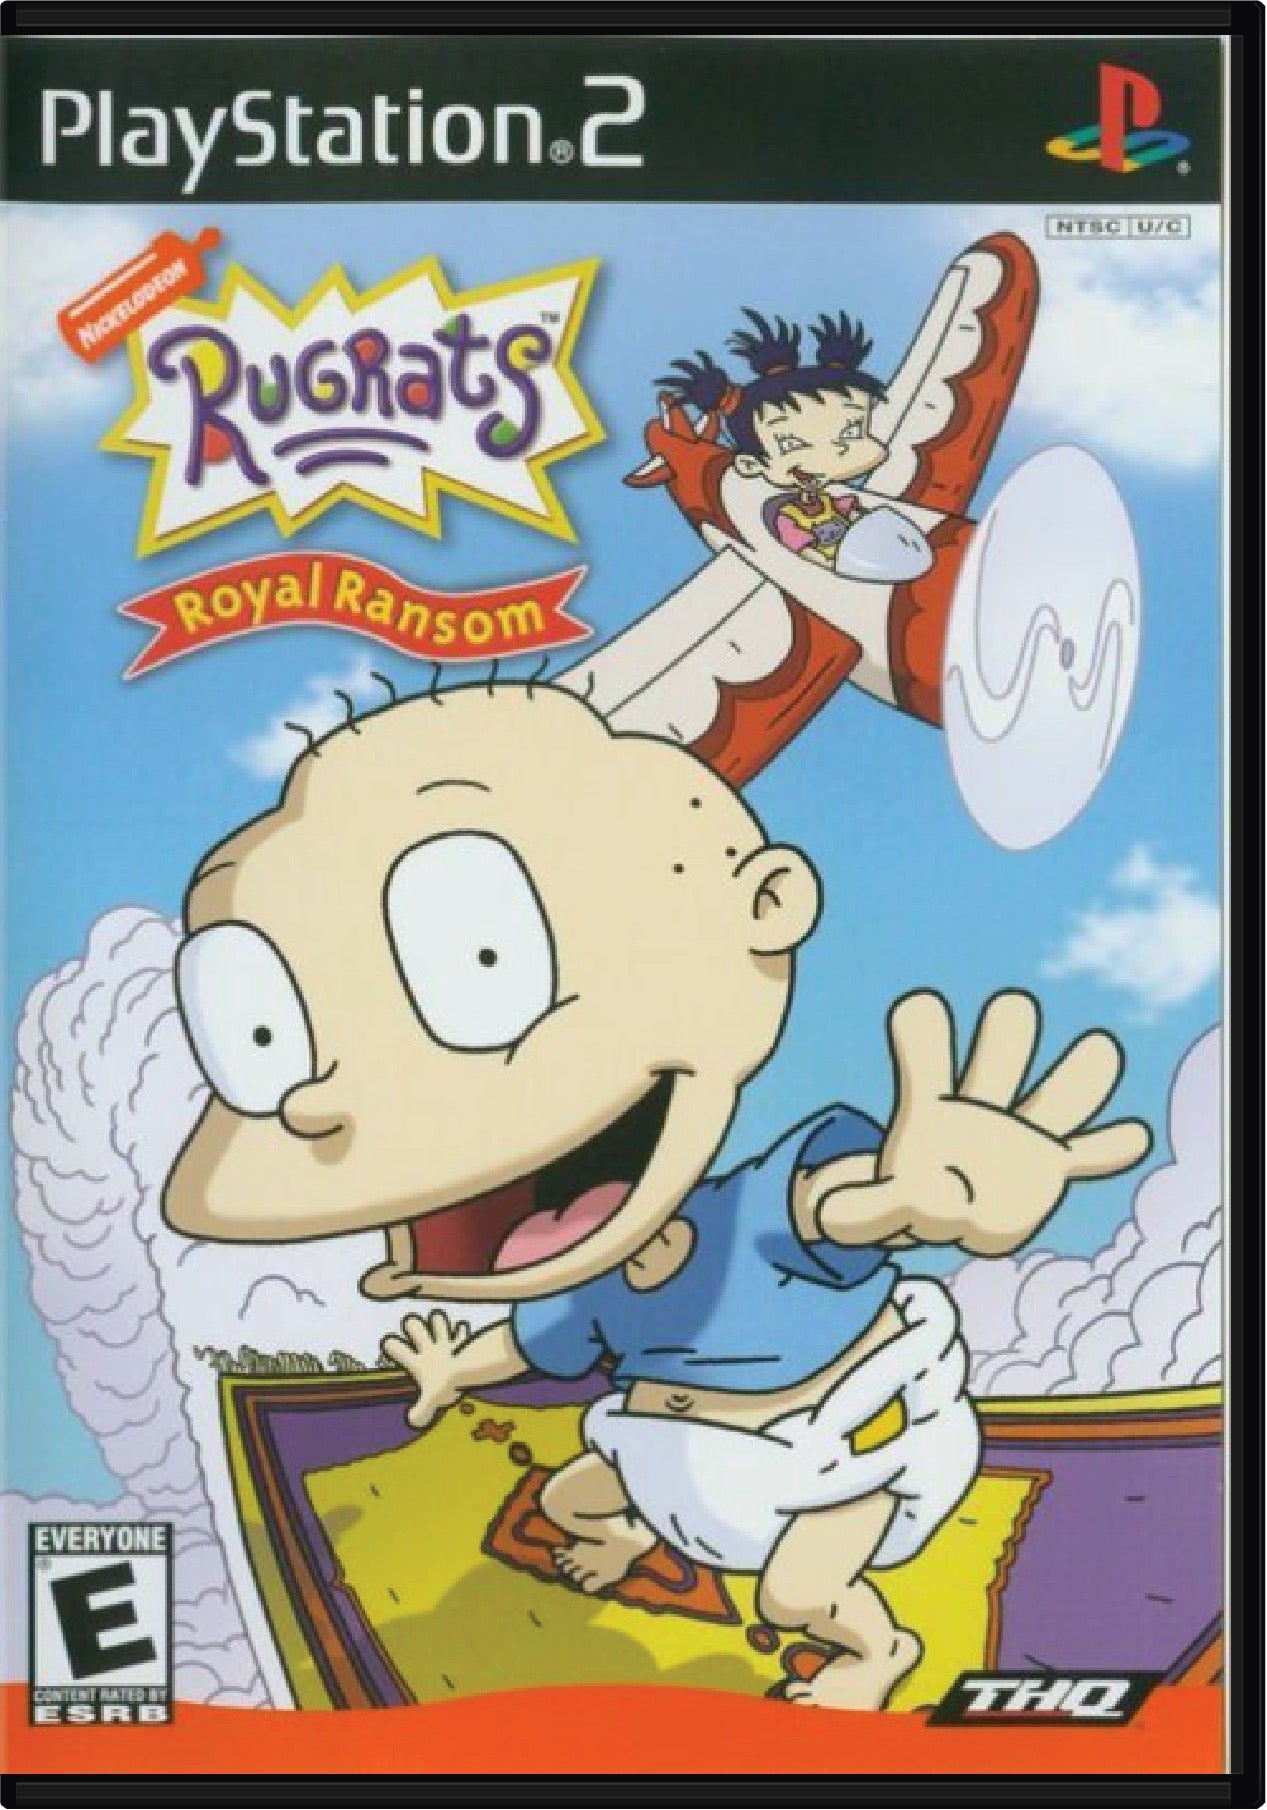 Rugrats Royal Ransom Cover Art and Product Photo